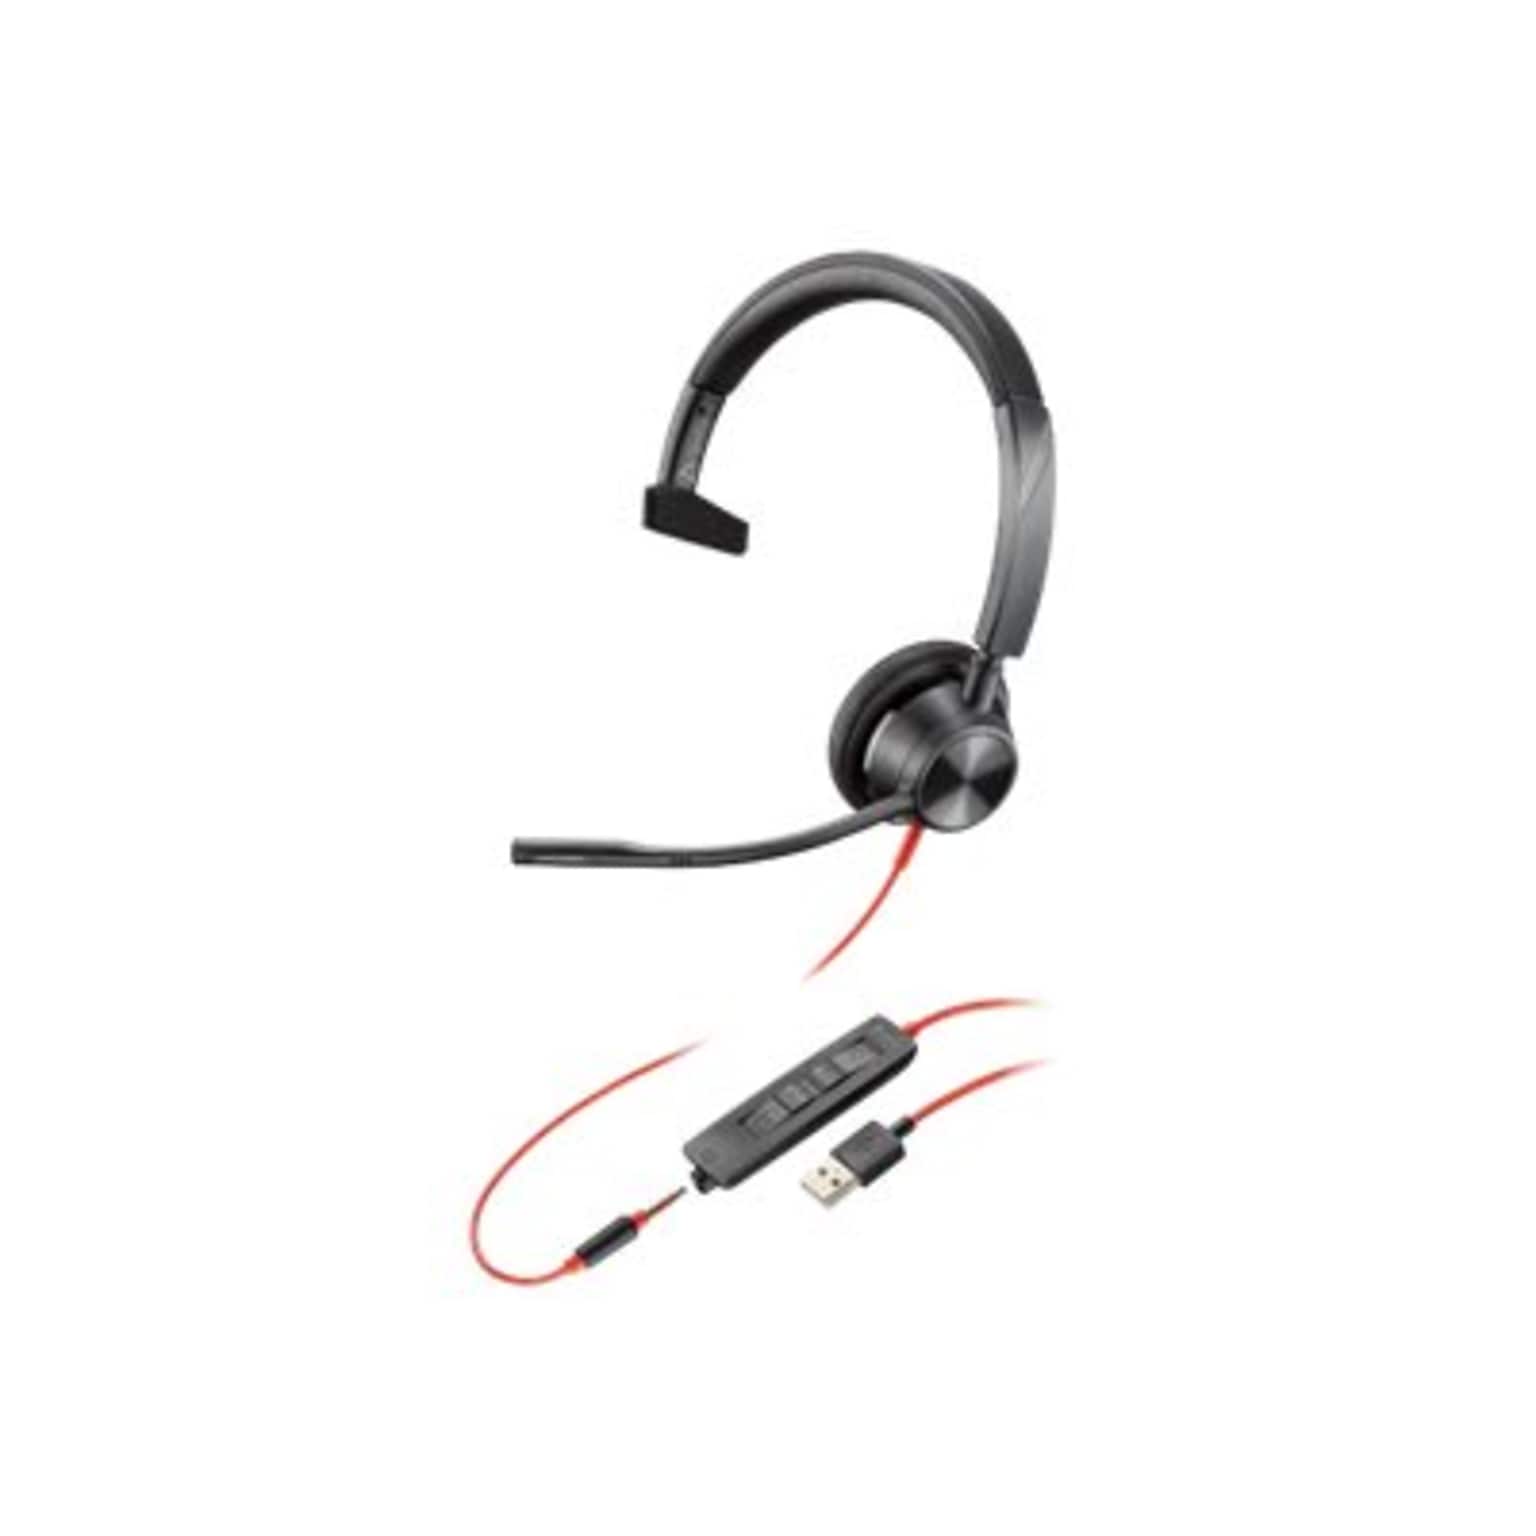 Plantronics Blackwire 3315 Wired Mono On Ear Computer Headset, Black (213936-01)